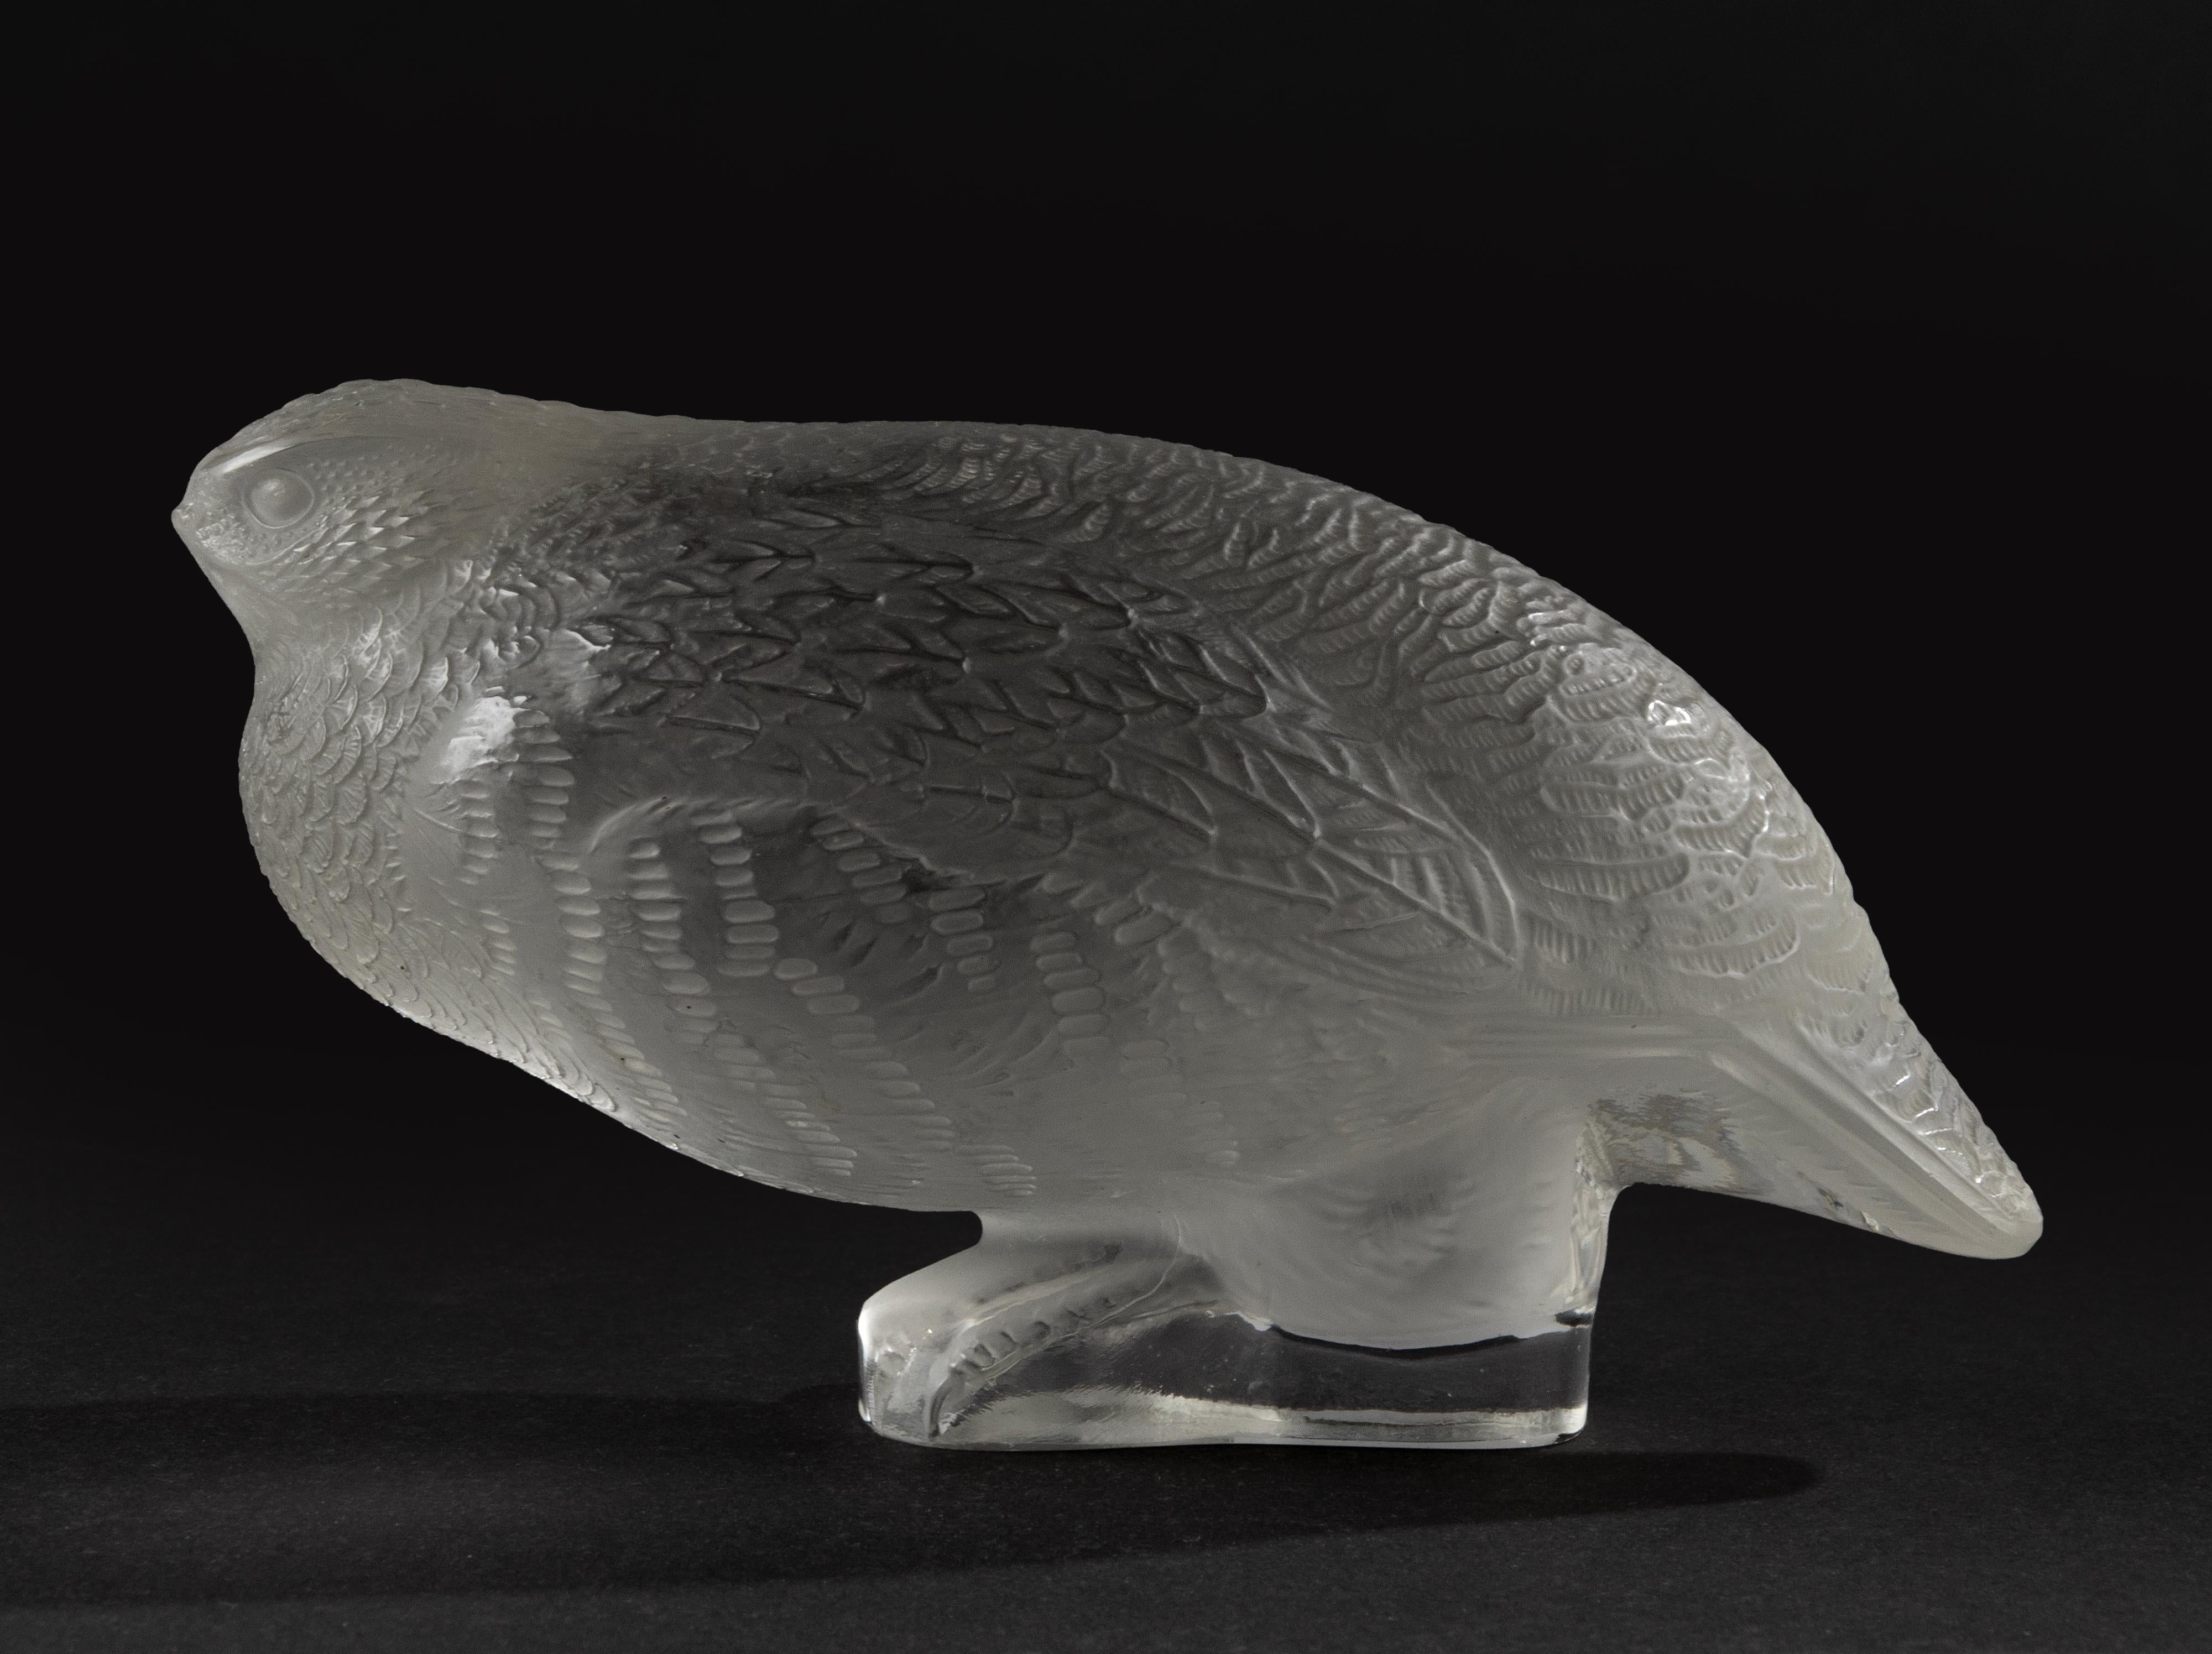 Beautiful crystal figurine or paperweight of a quail bird, made of frosted crystal. Marked on the bottom 'Lalique'. This figurine was issued in 1968. Nicely detailed design. The figurine is in very good condition.